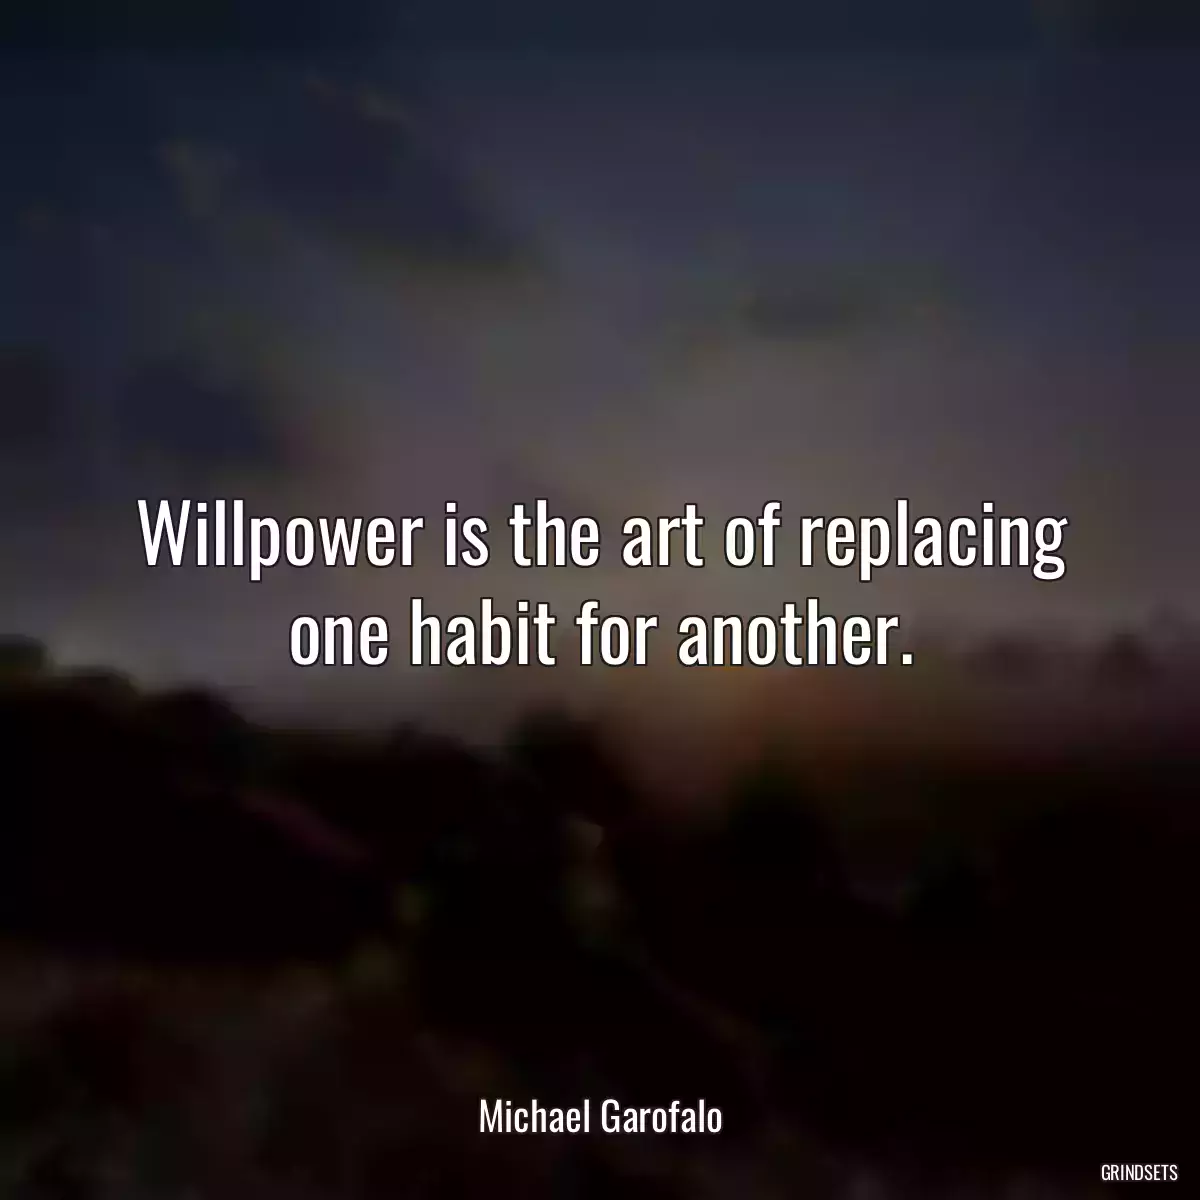 Willpower is the art of replacing one habit for another.